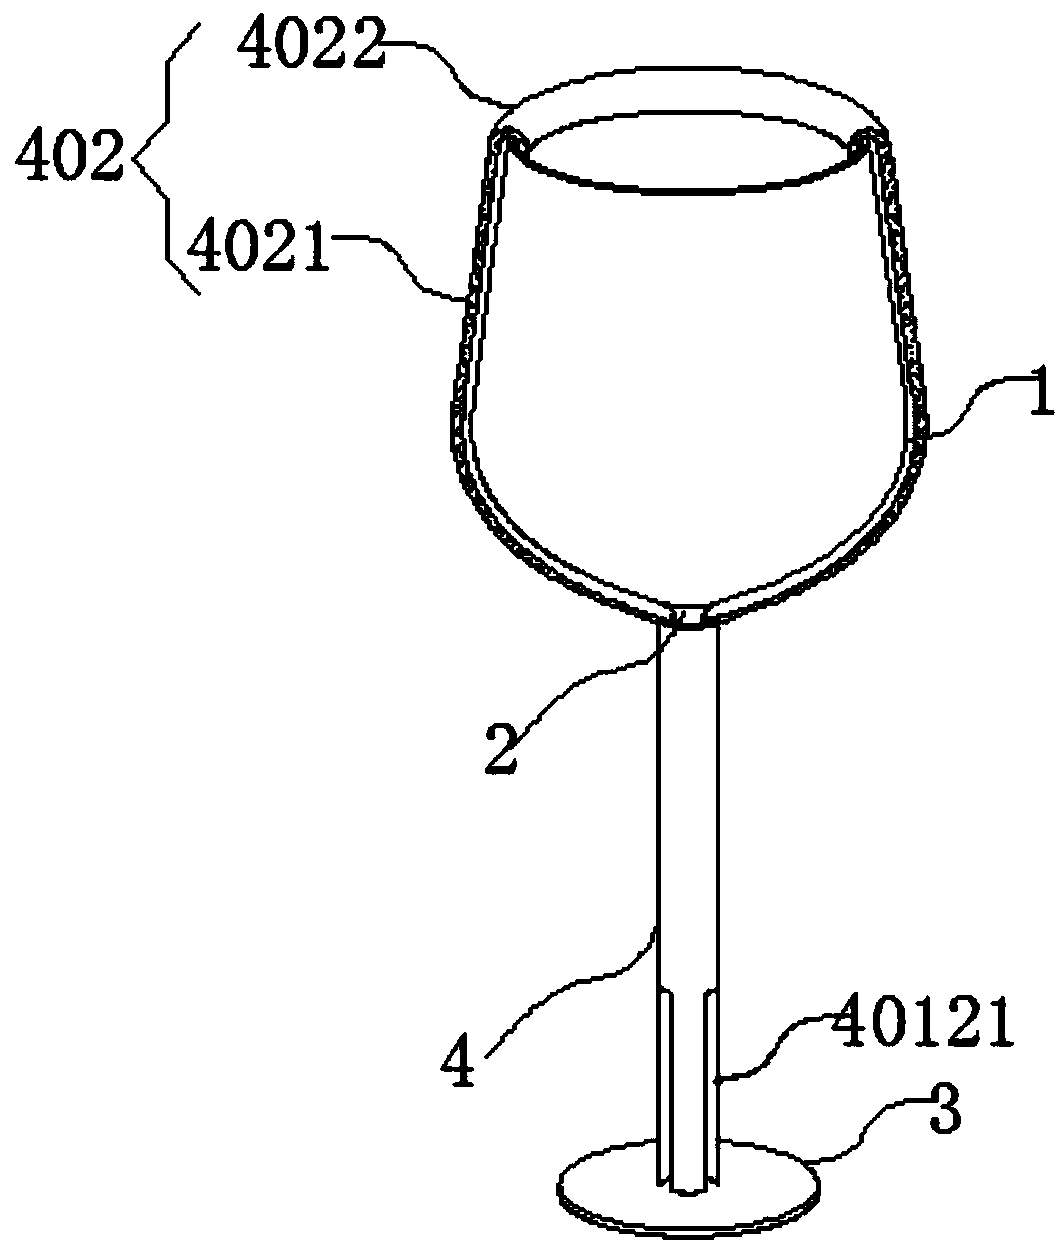 Goblet capable of increasing decanting speed